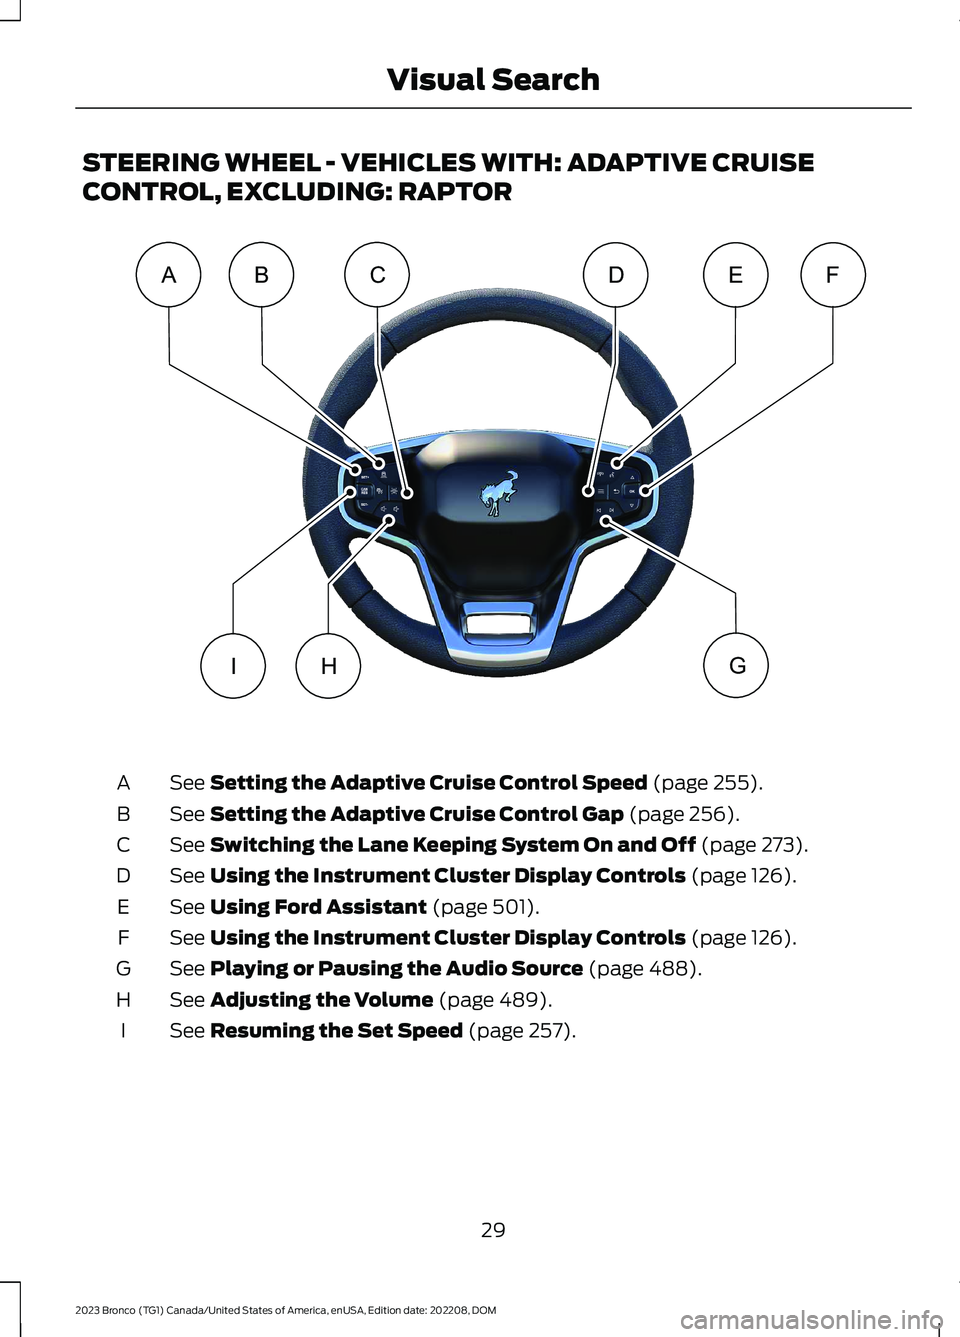 FORD BRONCO 2023  Owners Manual STEERING WHEEL - VEHICLES WITH: ADAPTIVE CRUISE
CONTROL, EXCLUDING: RAPTOR
See Setting the Adaptive Cruise Control Speed (page 255).A
See Setting the Adaptive Cruise Control Gap (page 256).B
See Switc